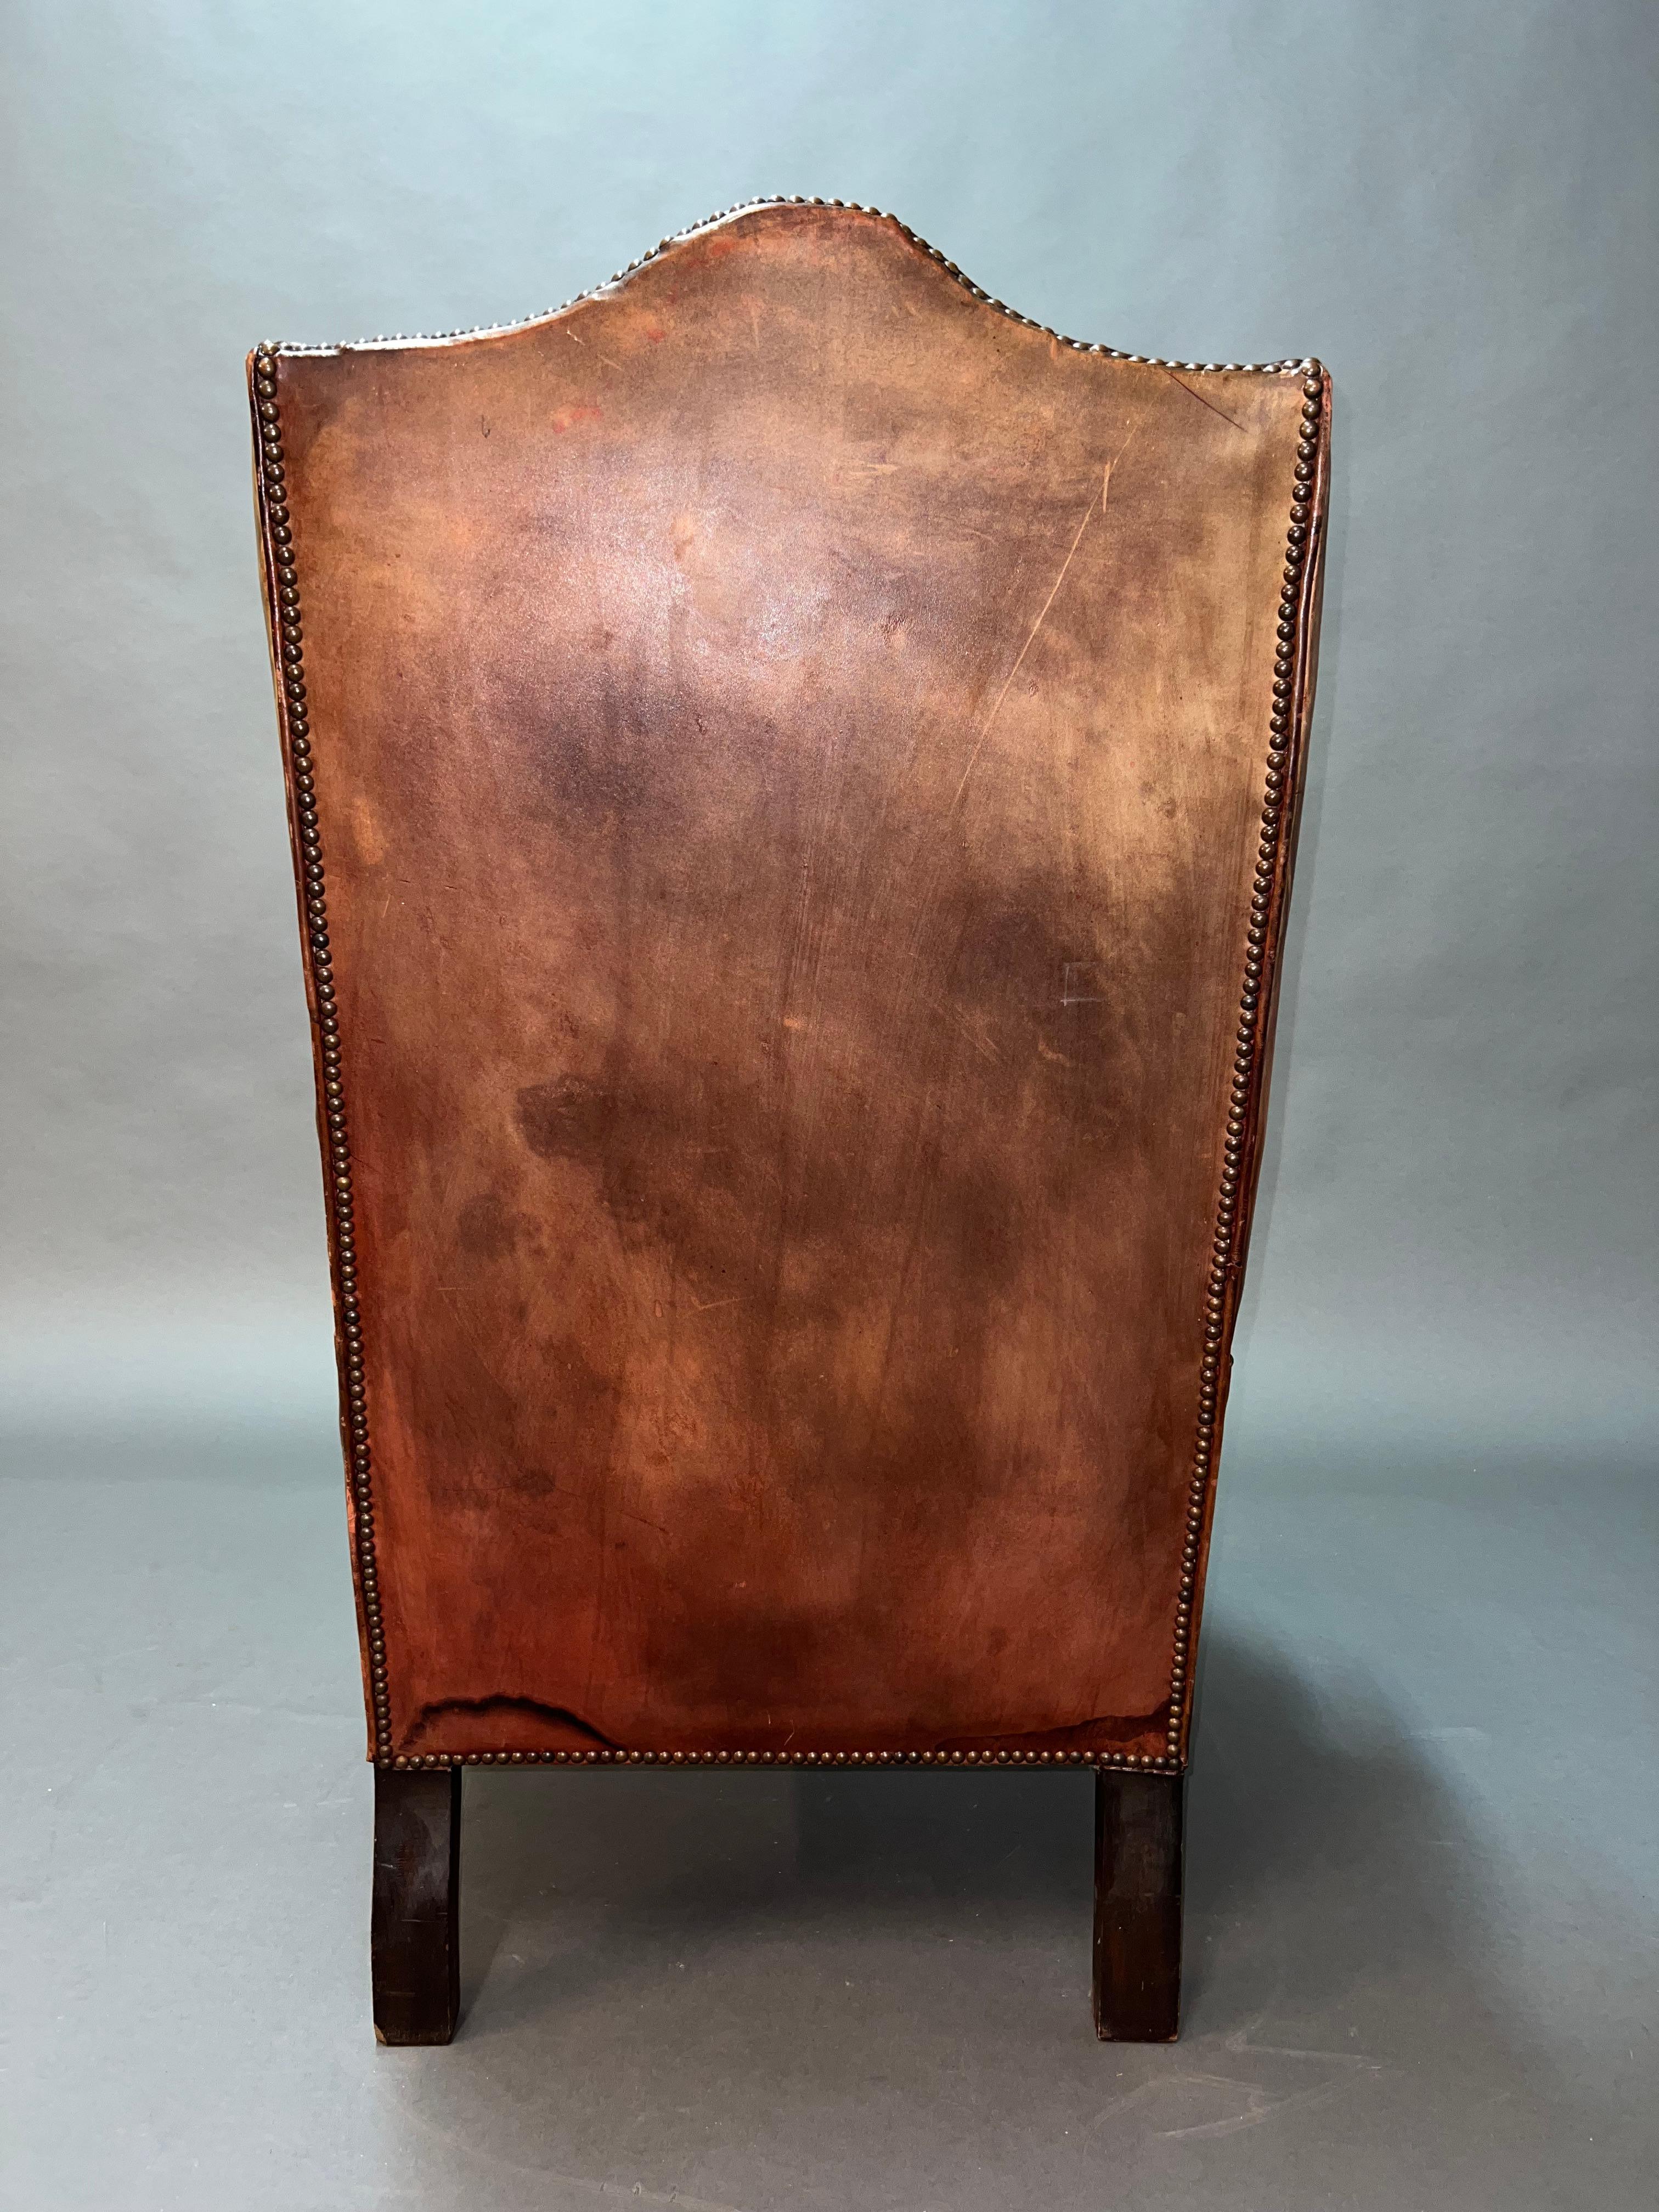 Vintage Brown Leather Tufted Chesterfield Wingback Armchair Original, circa 1880 For Sale 7